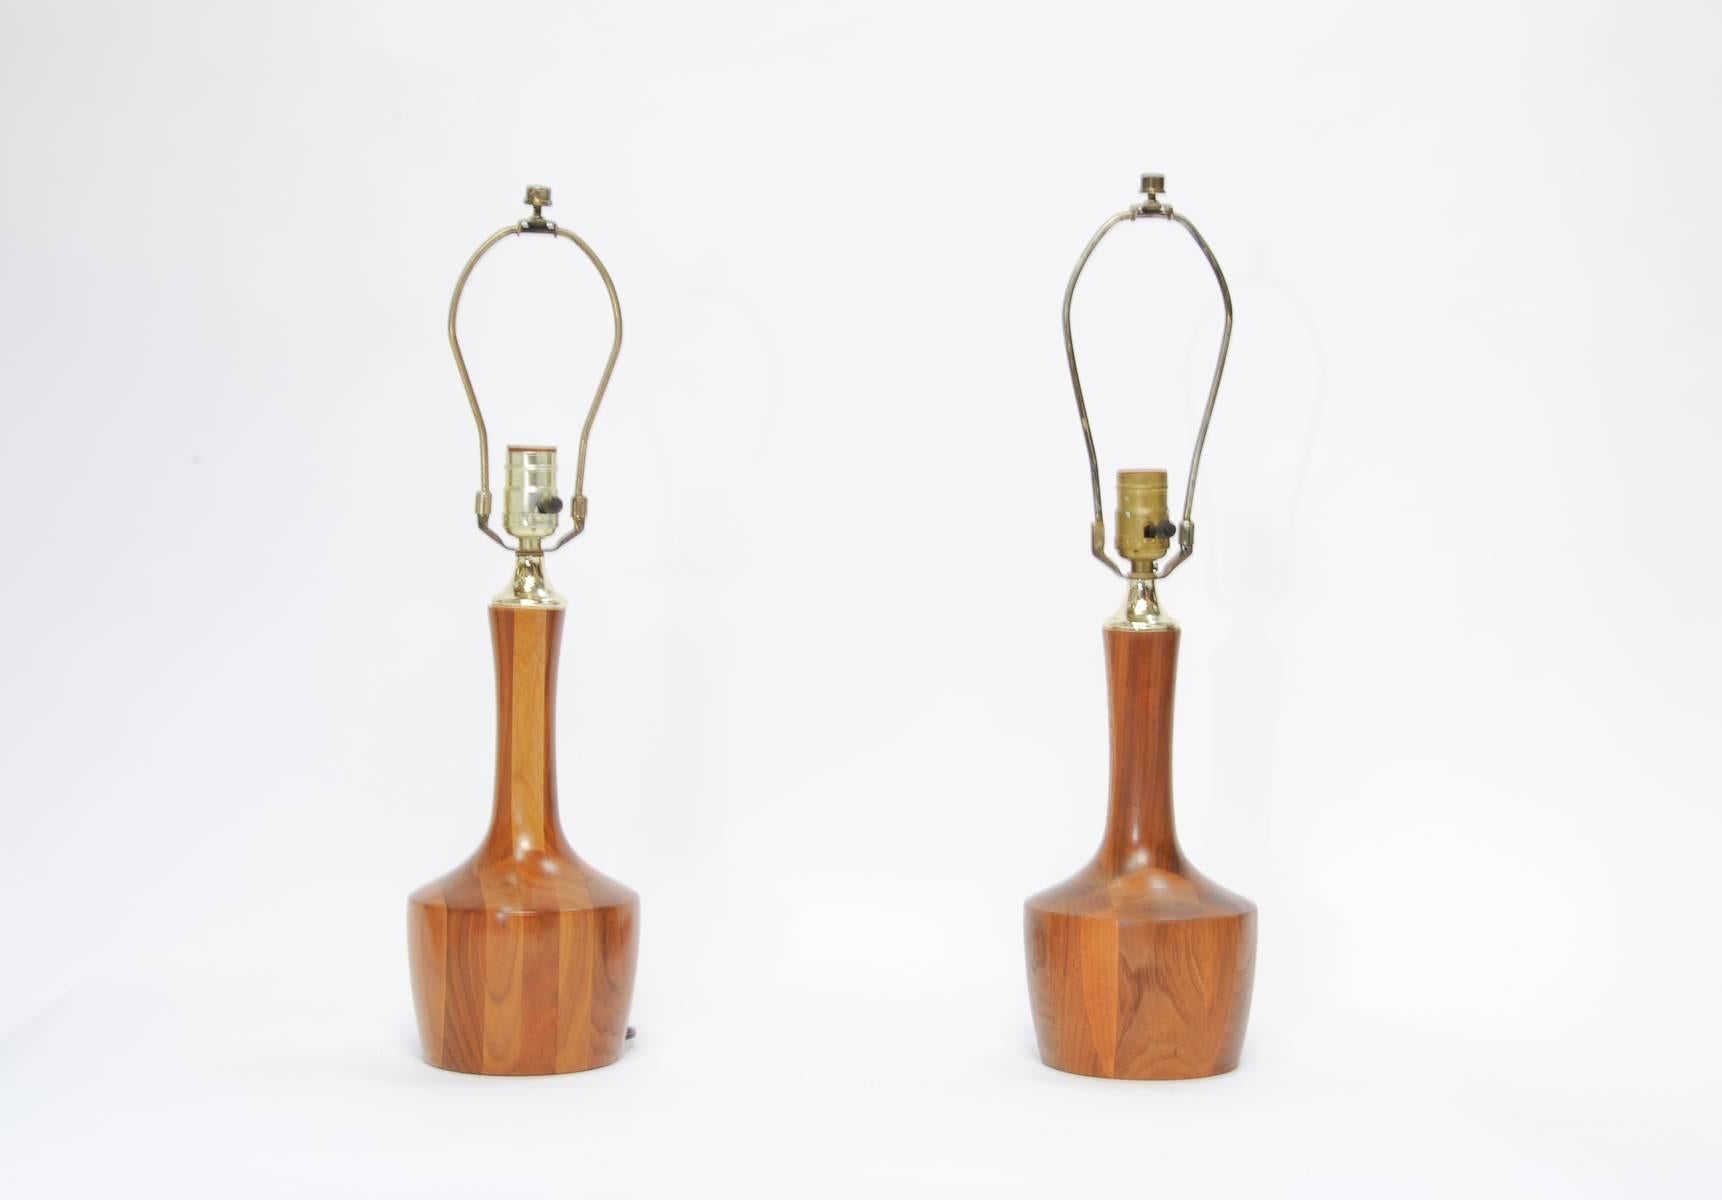 A wonderful pair of butcher block table lamps. Wonderfully shaped and formed in the Danish manner of elegance.